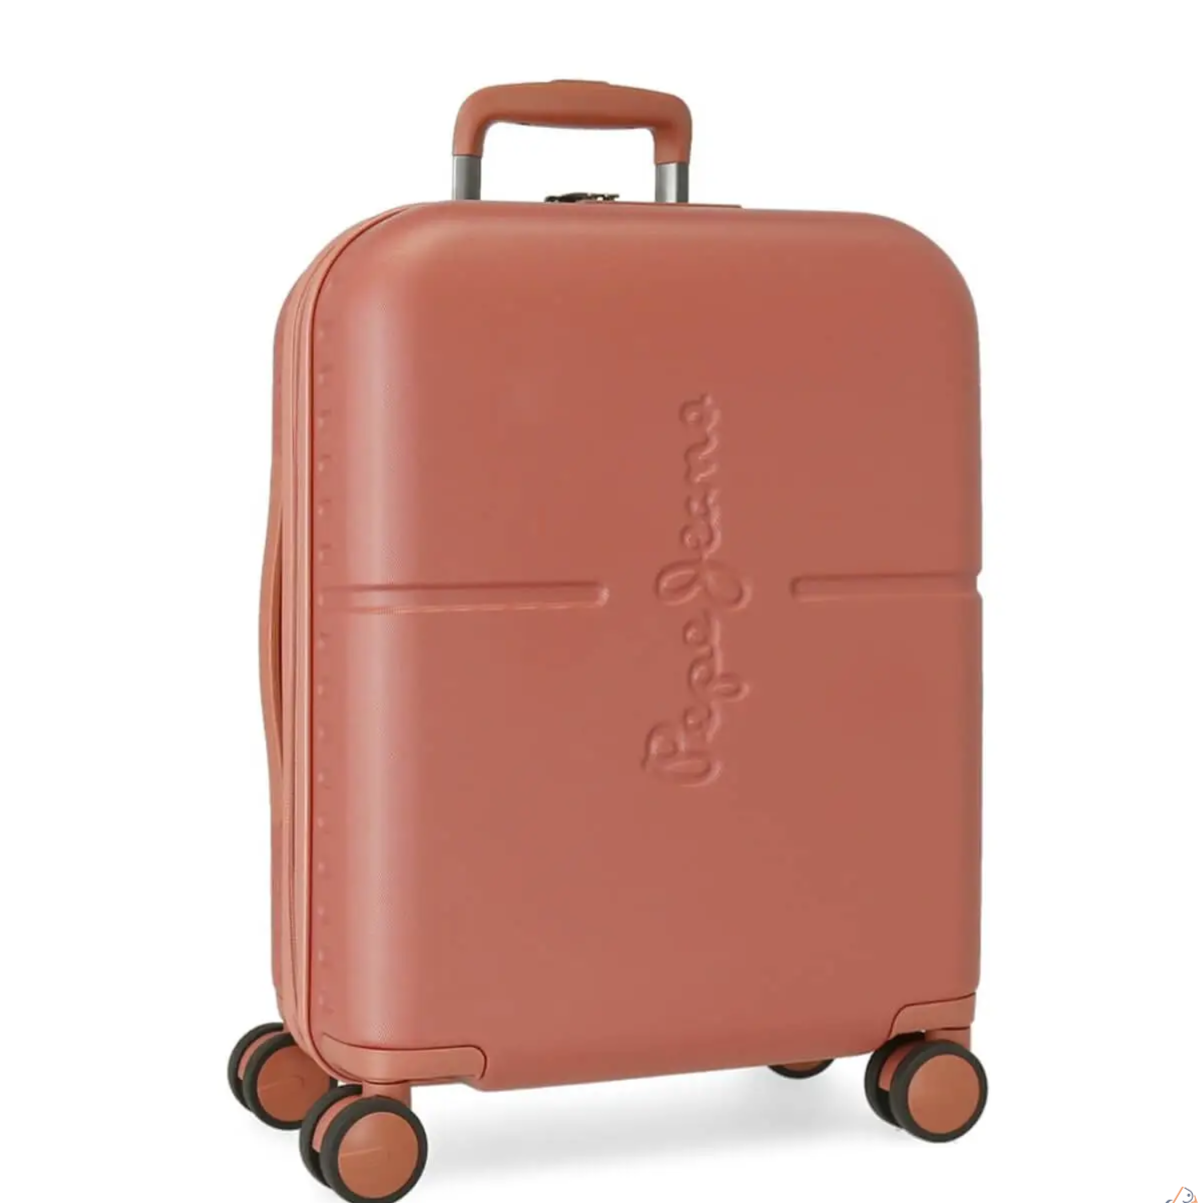 CABINE VALISE STYLE TROLLEY